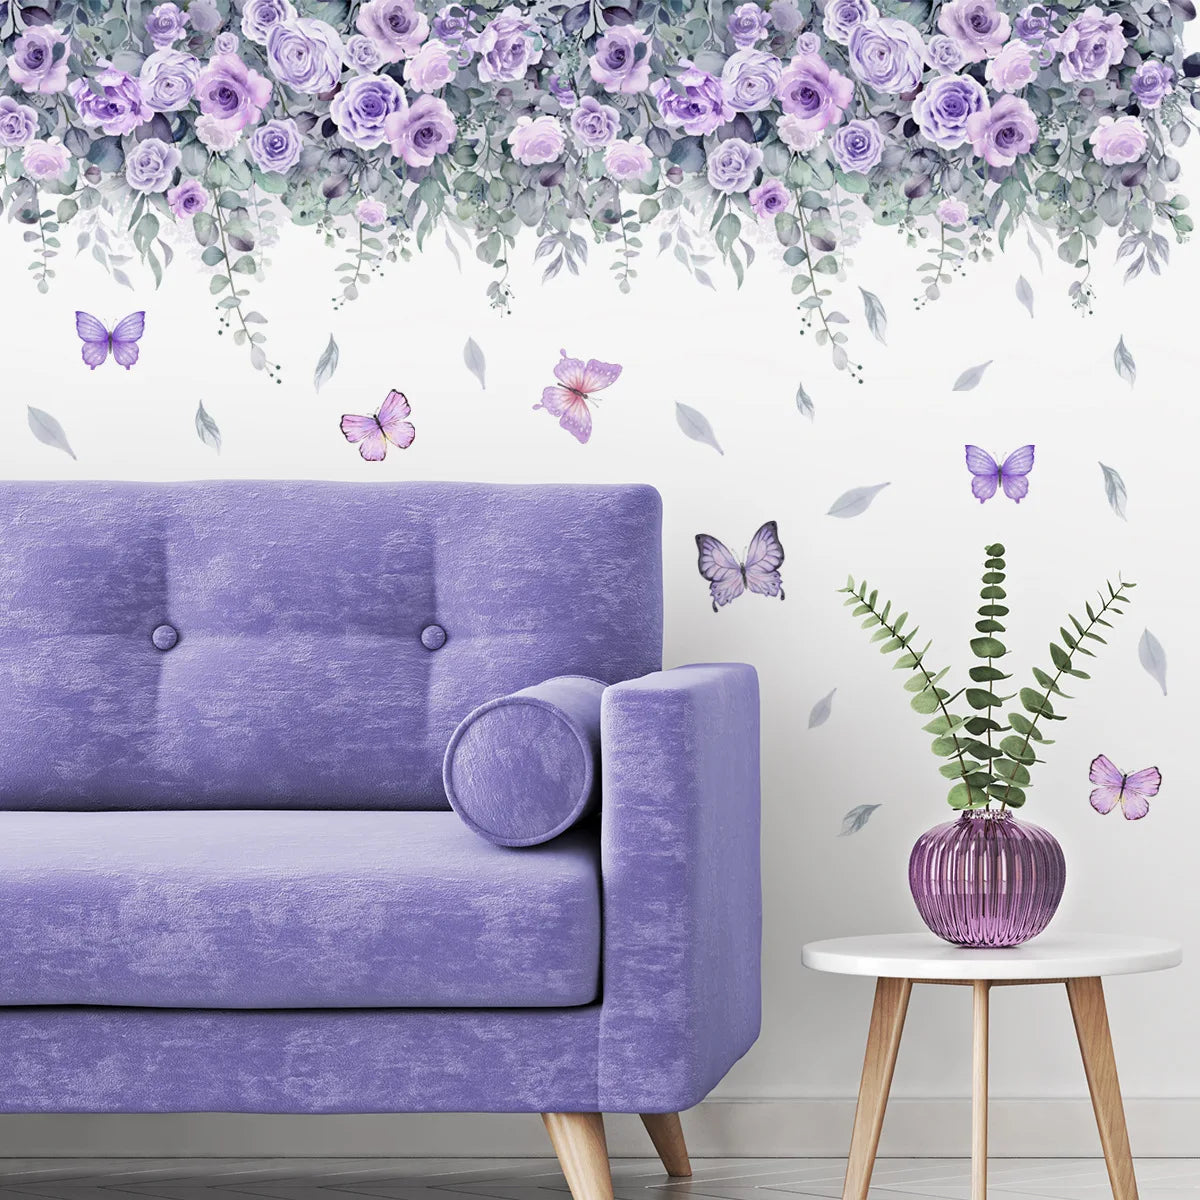 Purple Flowers Plant Wall Sticker for Living Room Bedroom Background Wall Decor Pastoral Wall Decals Girls Room Daughter Room